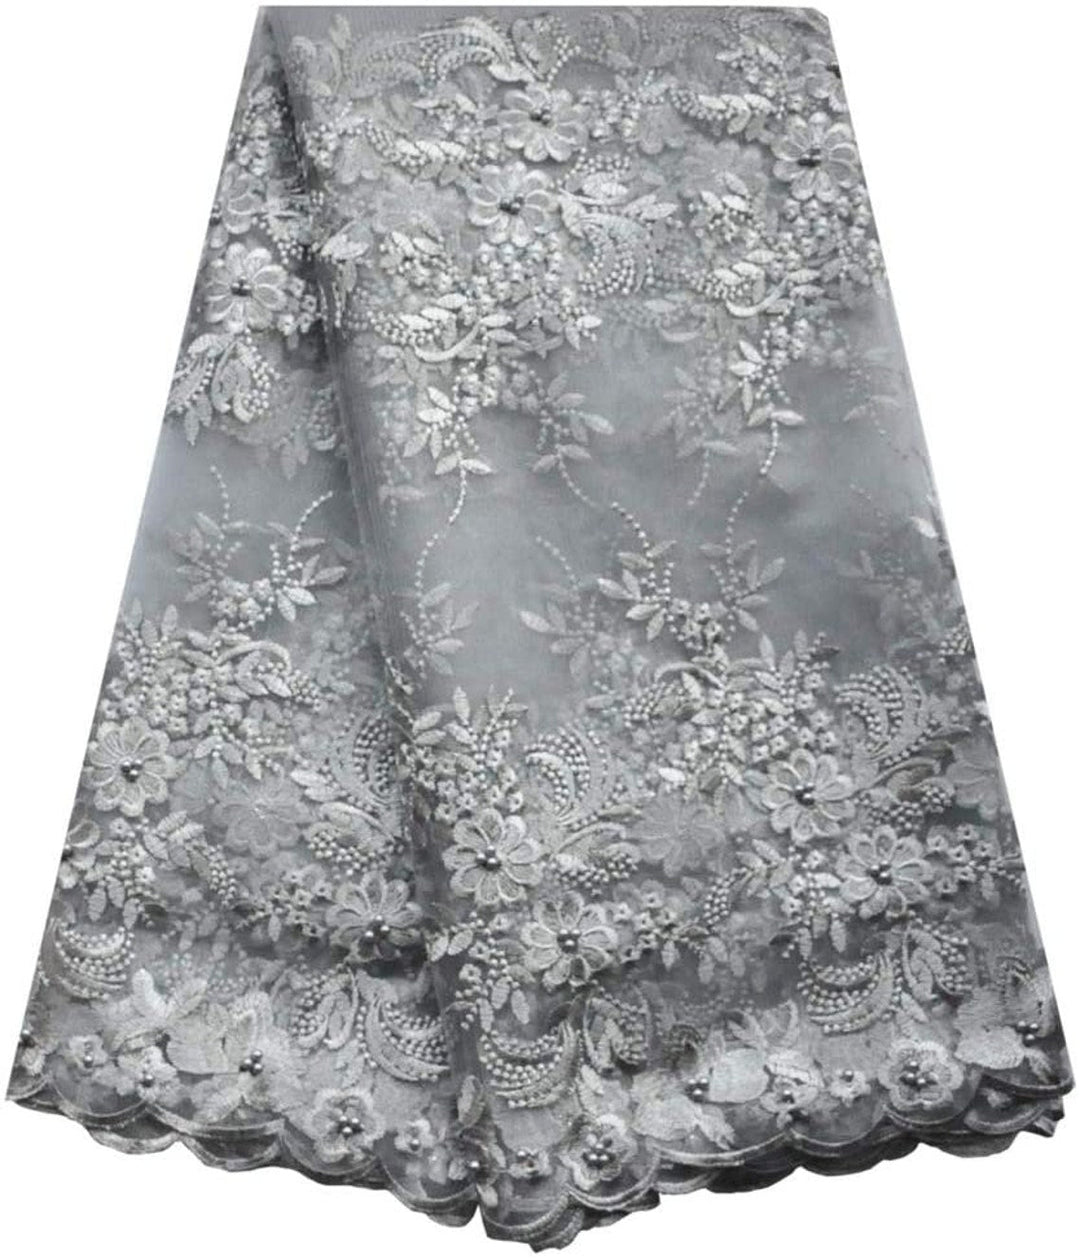 5 YARDS / 3 COLORS / White Gray Yellow Mesh Sequin Embroidery Lace / Bridal Dress Fabric - Classic & Modern